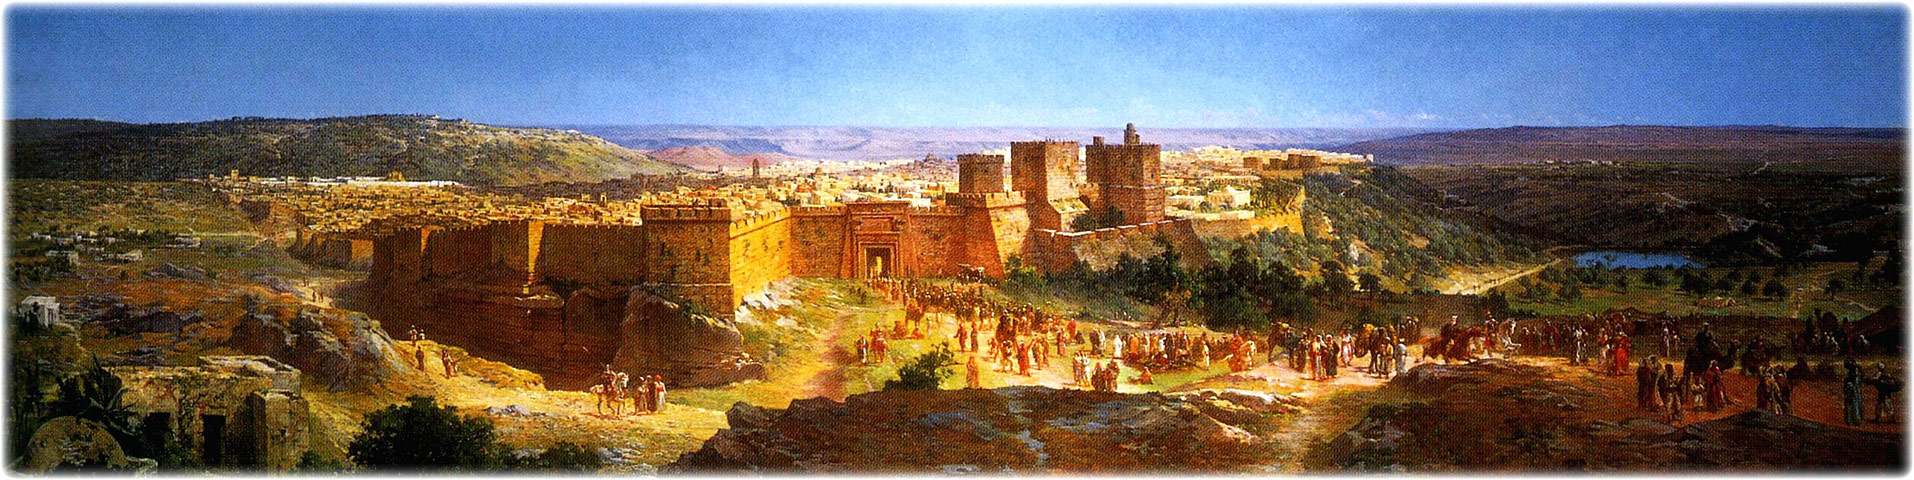 Jerusalem, original oil painting on canvas by Olivier Pichat, d. 1912. View of city’s northwest corner showing Herod the Great’s palace and towers (right center). Jesus’ crucifixion took place outside the city’s walls on Golgotha (bottom center and right). Joseph of Arimathea’s garden tomb is at bottom left. Temple area is a row of white buildings at left center, and above it is the Mount of Olives.